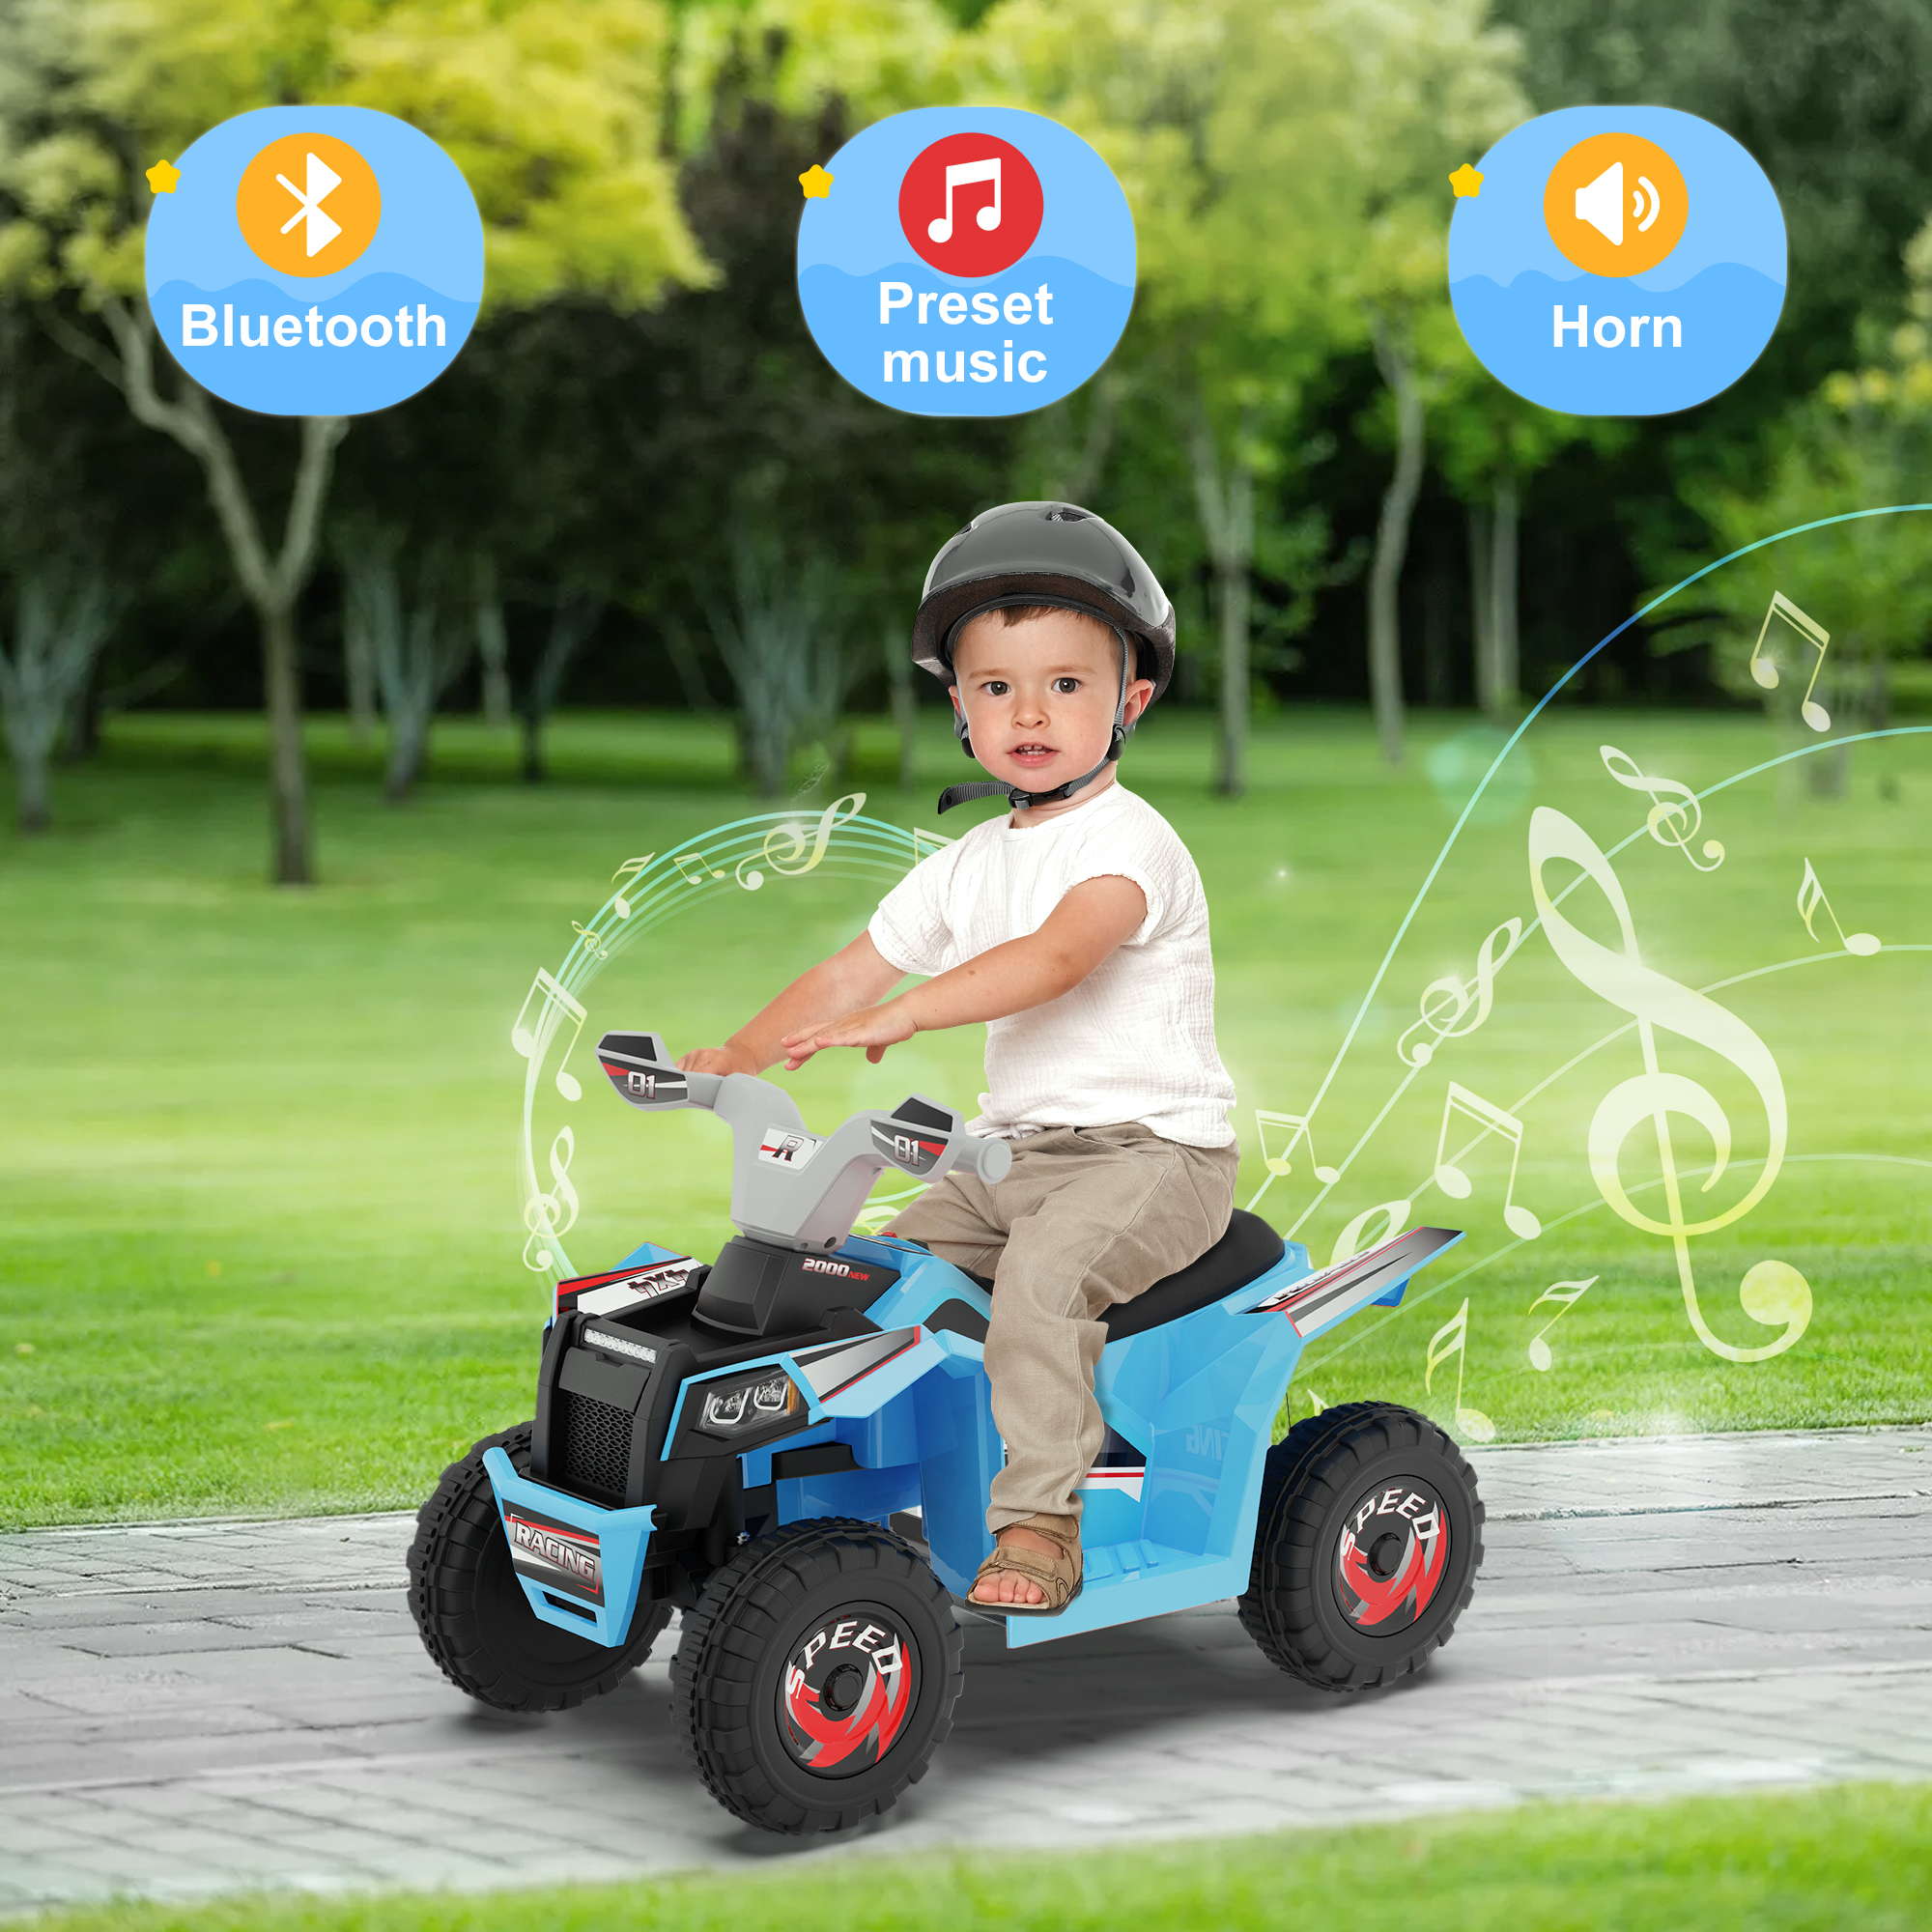 TOKTOO 6V 7Ah Powered Ride-on ATV for Toddler Aged 1-3 Year Old, Electric 4-Wheeler Toy Car w/ Horn, Music Player, Quad Bike-Blue - image 2 of 12